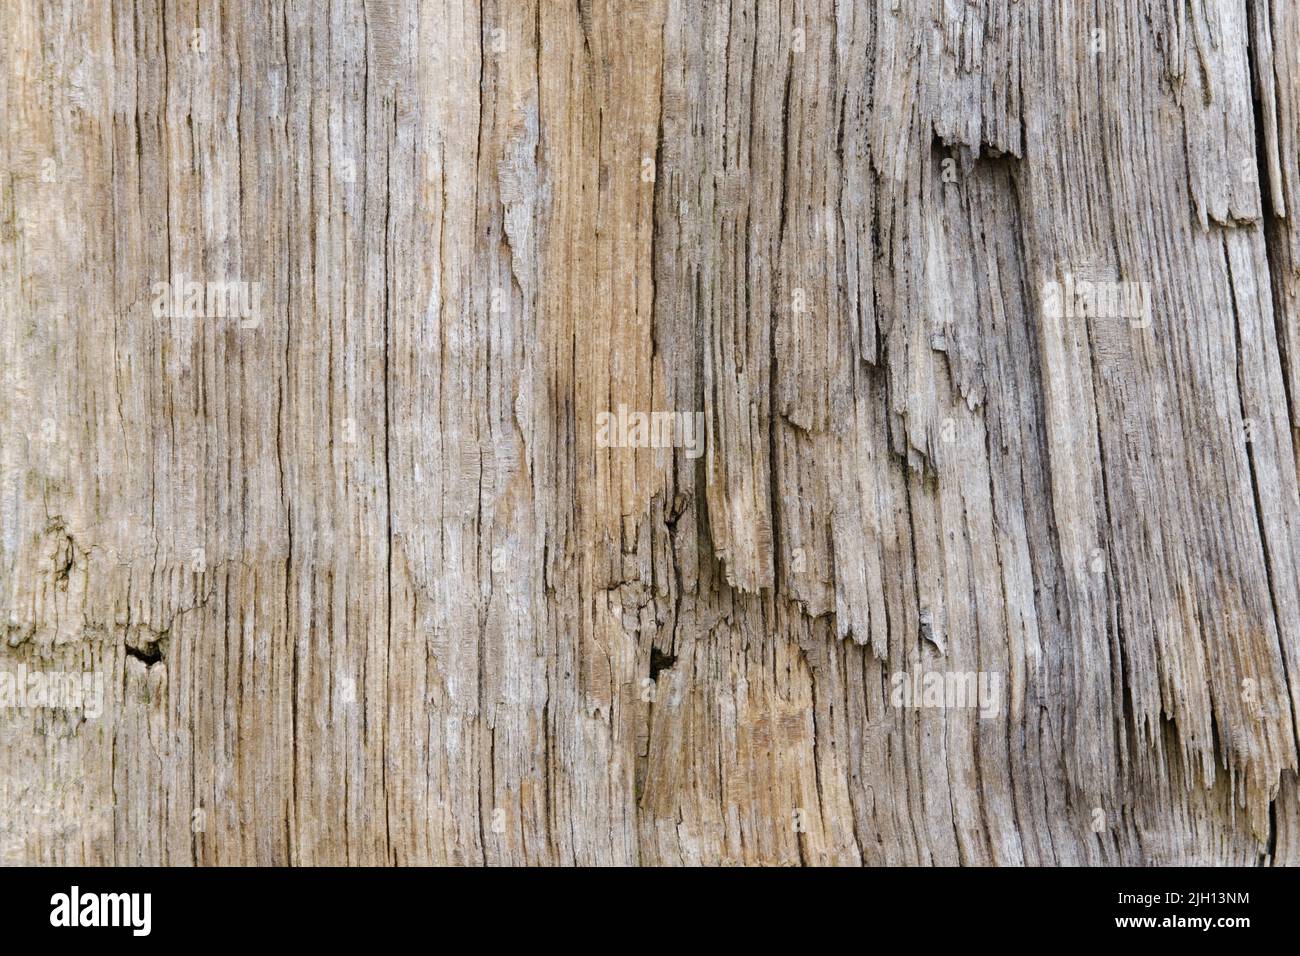 Wooden wall Stock Photo